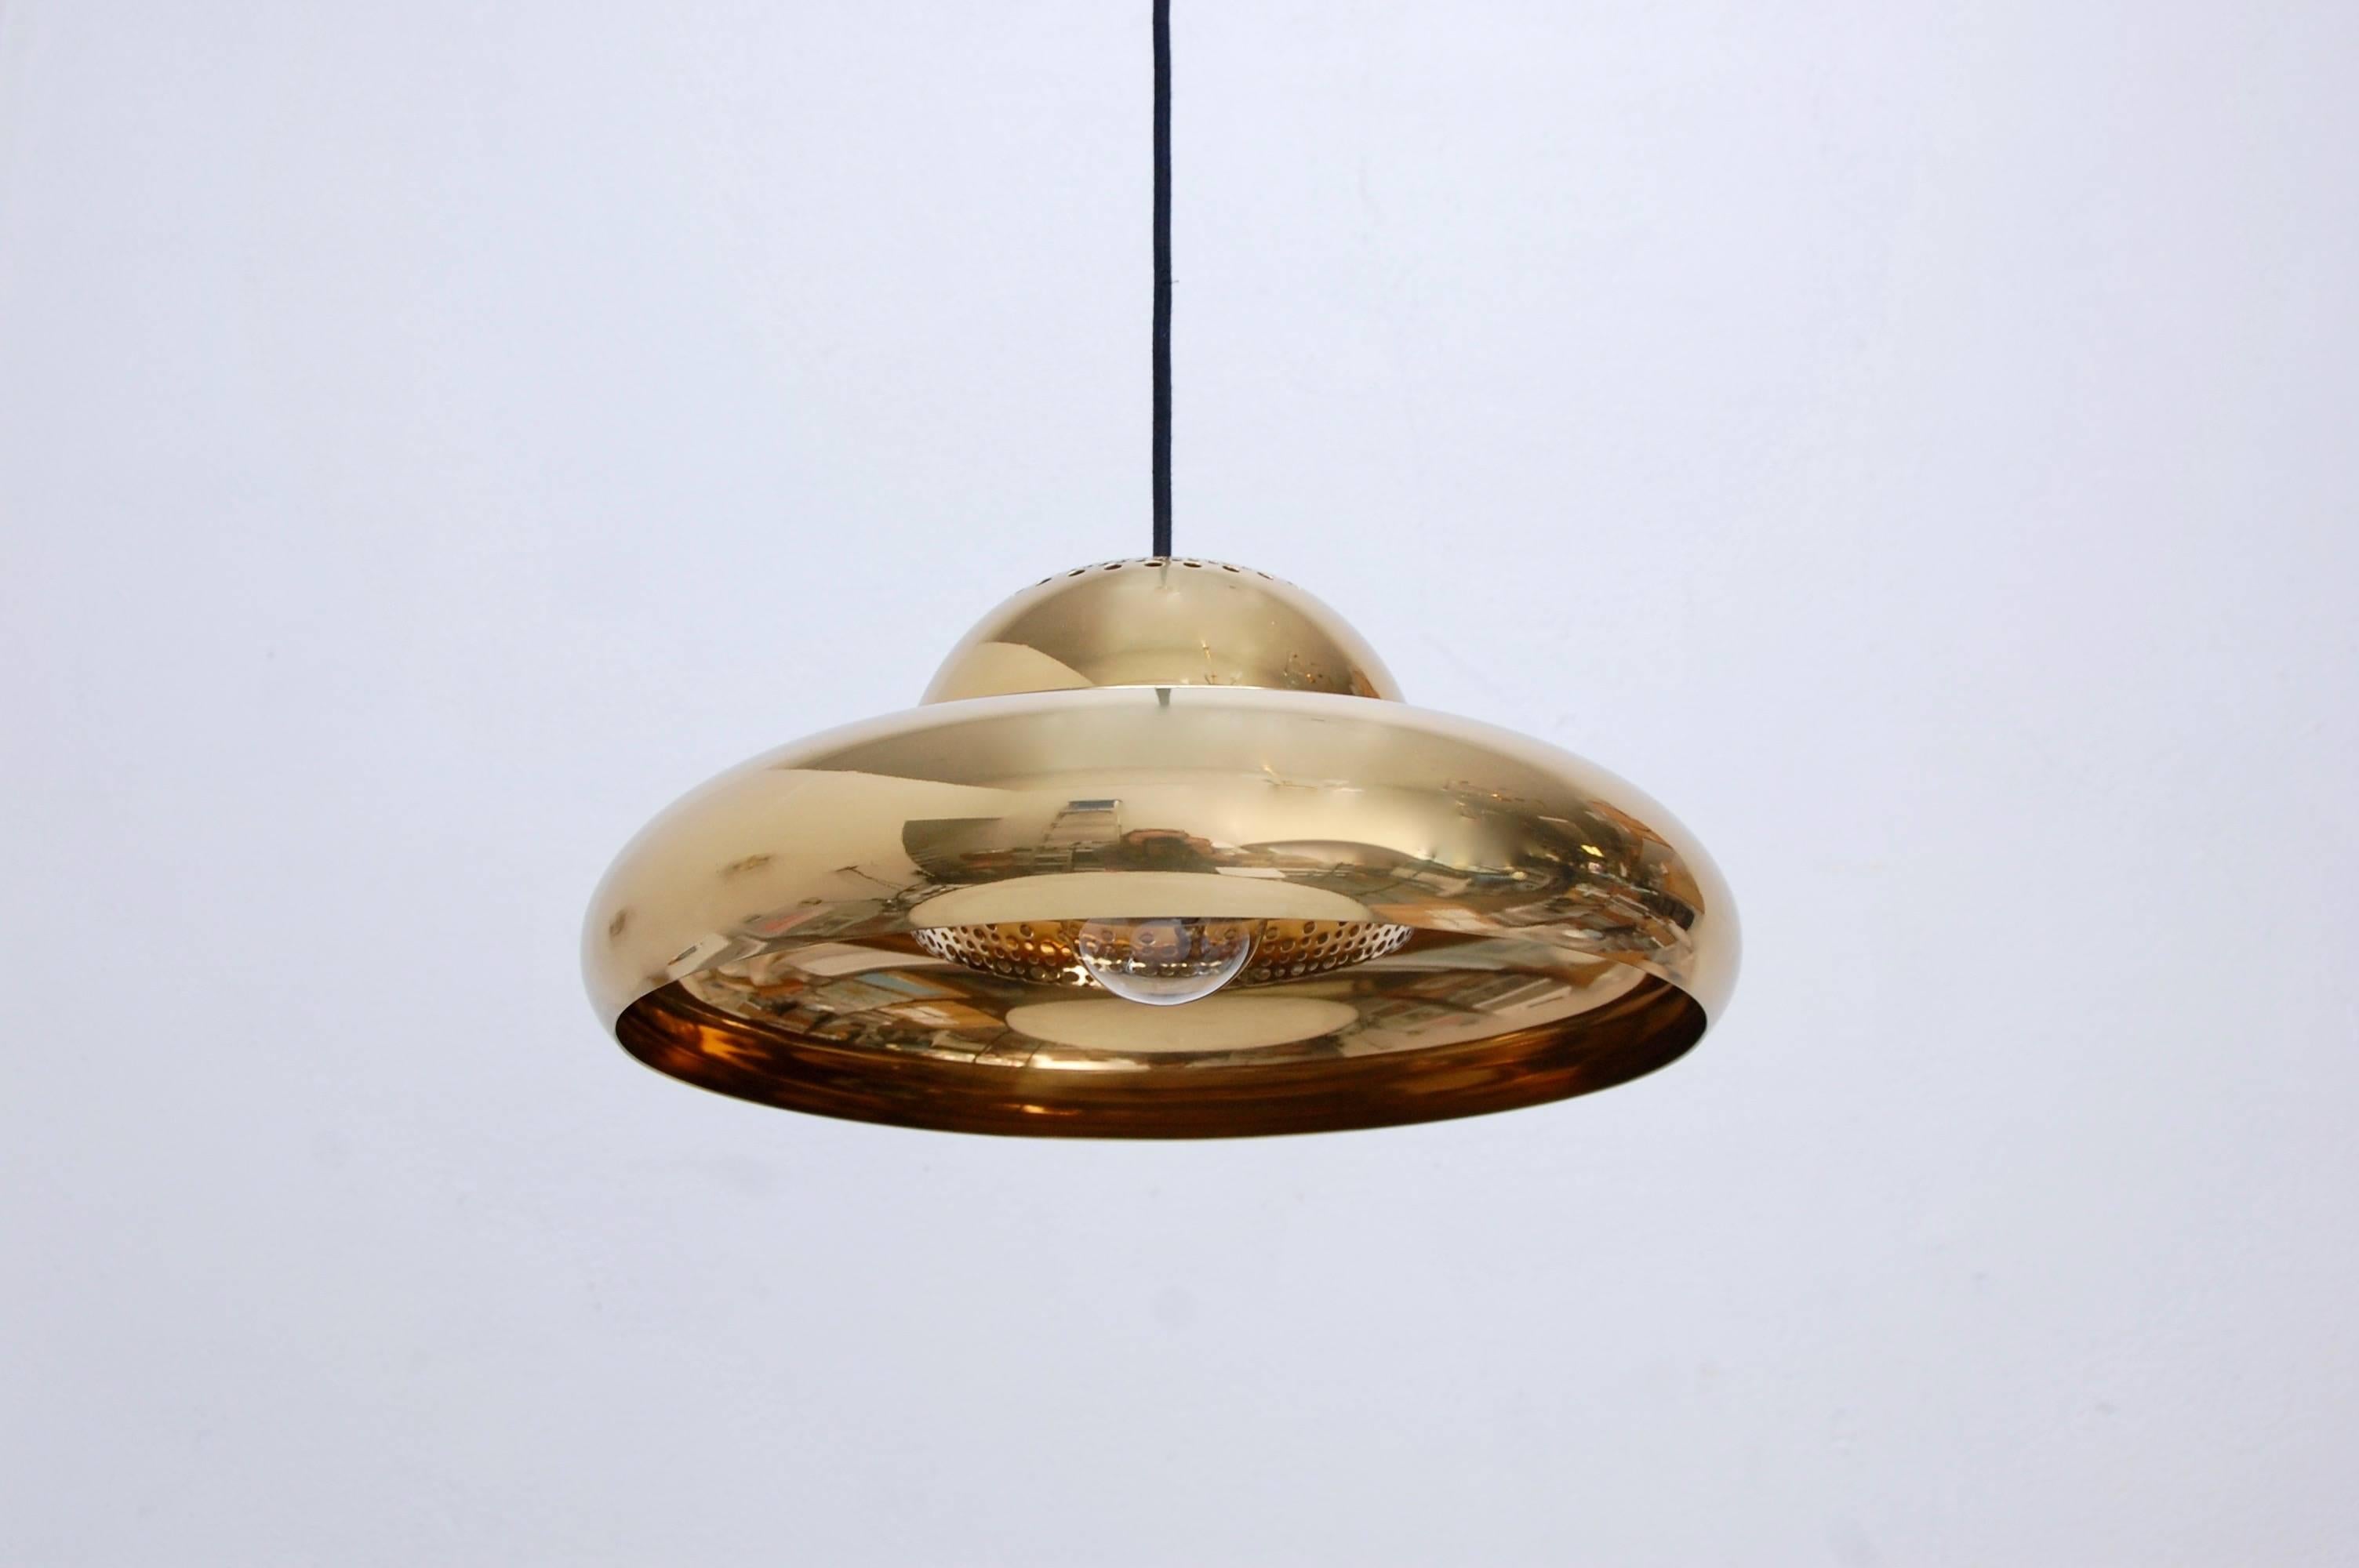 Two “Fiori di Loto” brass pendants by Tobia Scarpa for Flos. Naturally aged patina brass lacquered finish. Wired for the US. Overall drop adjustable upon request.
We at Lumfardo Luminaires do all the restorations of our vintage collection in house